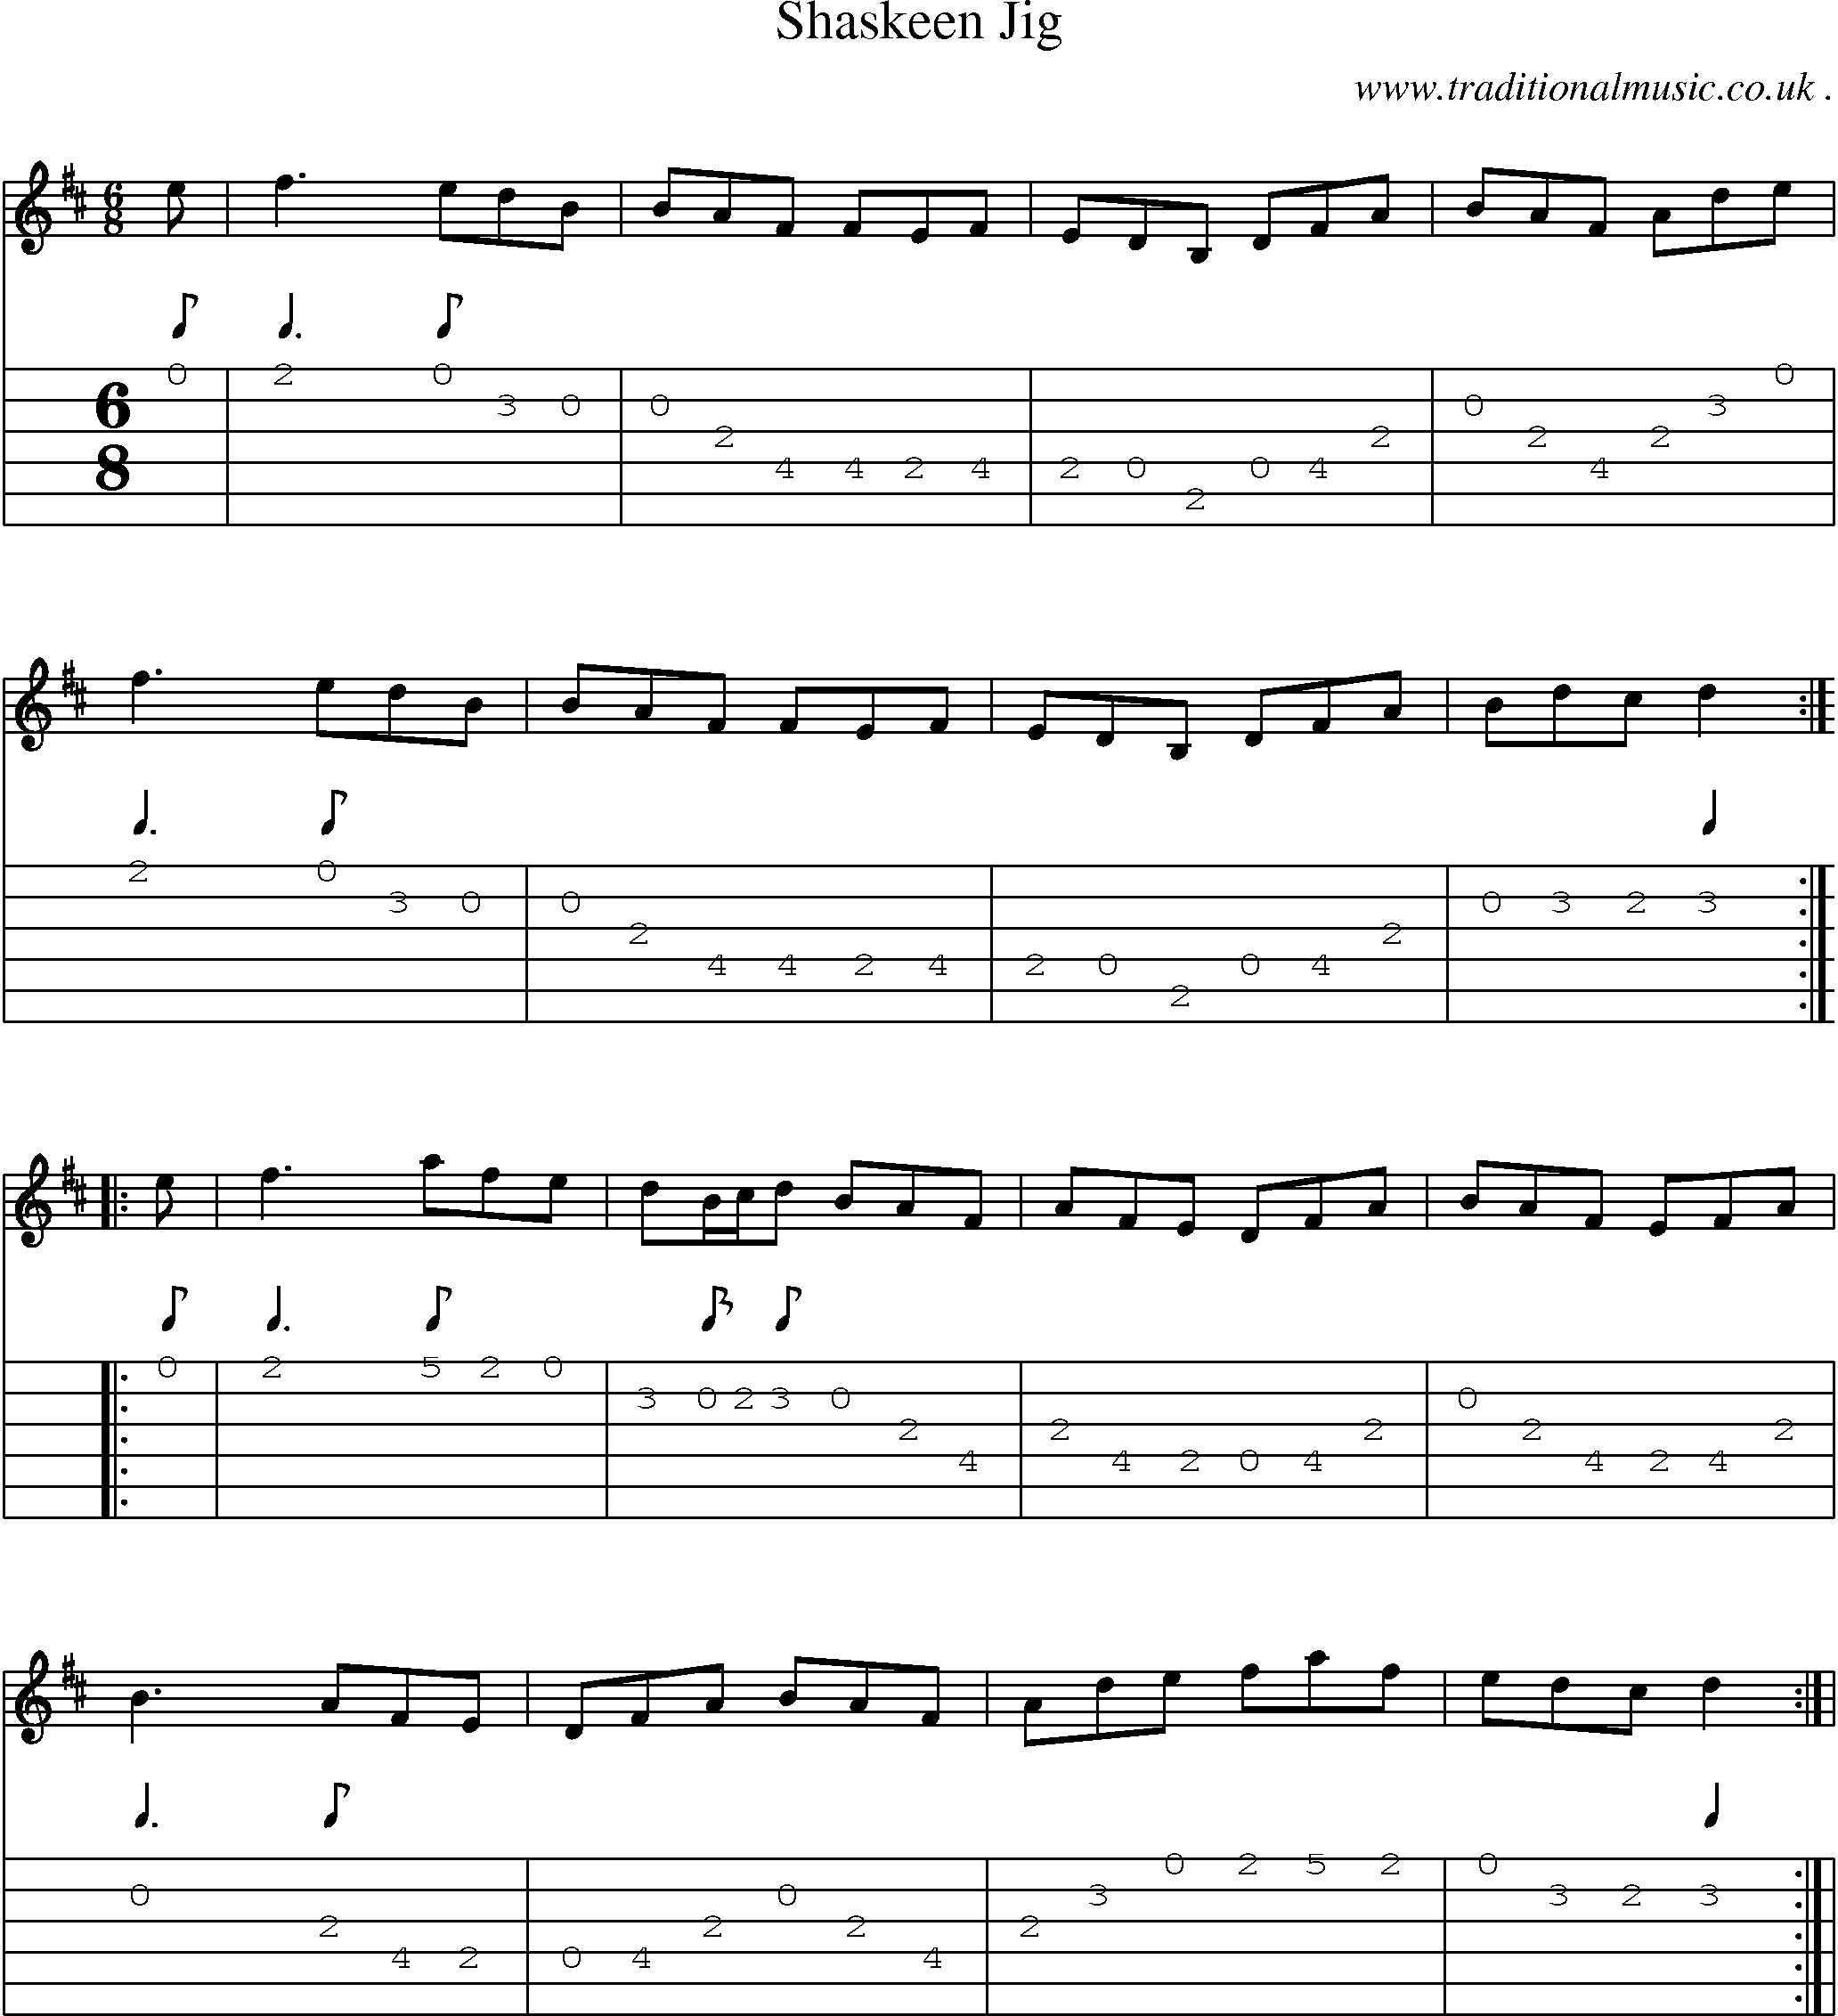 Sheet-Music and Guitar Tabs for Shaskeen Jig